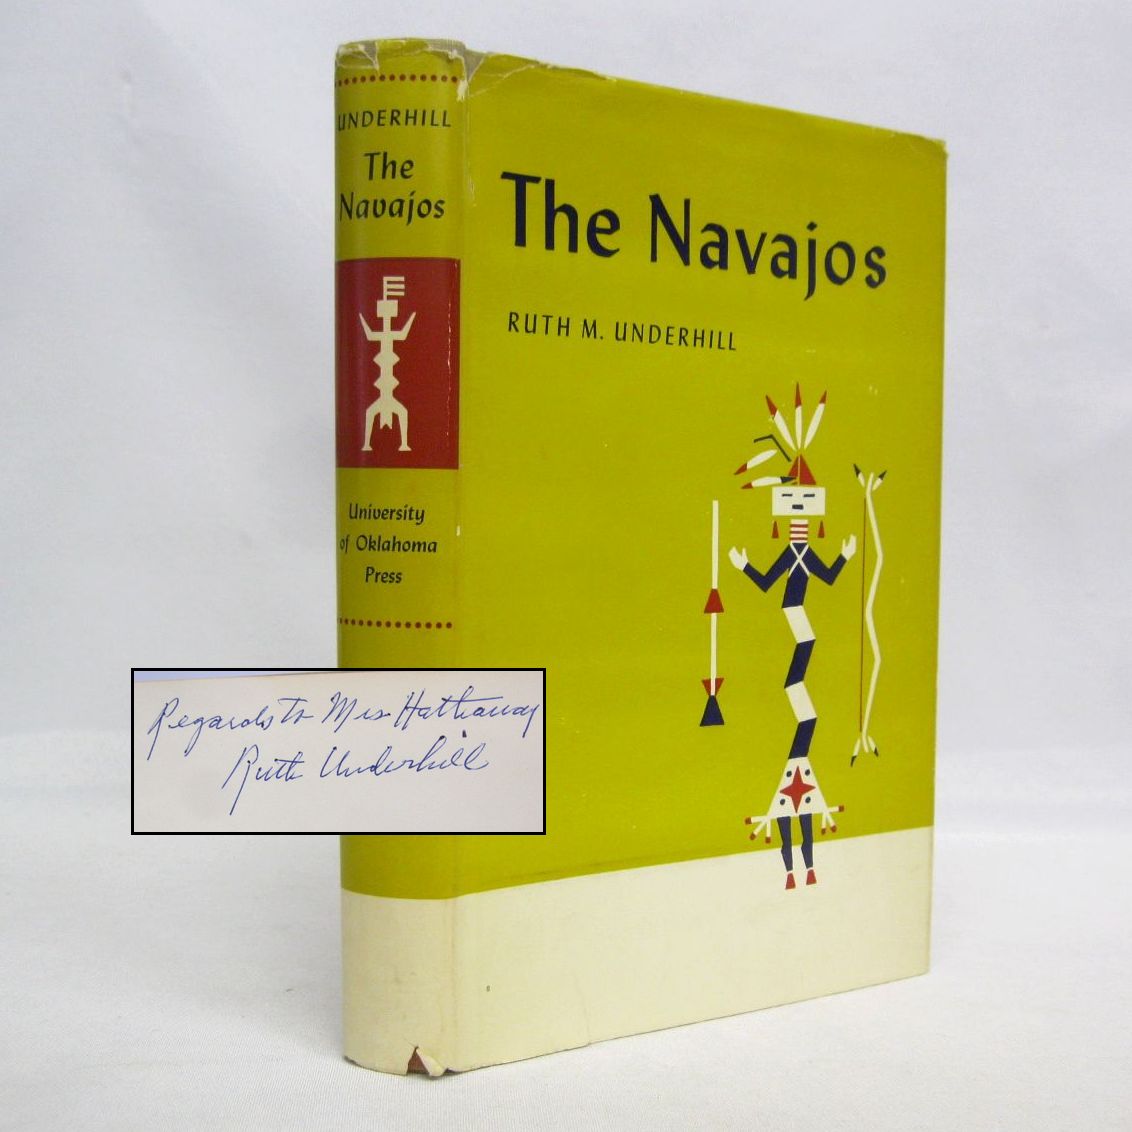 The Navajos by Ruth M Underhill